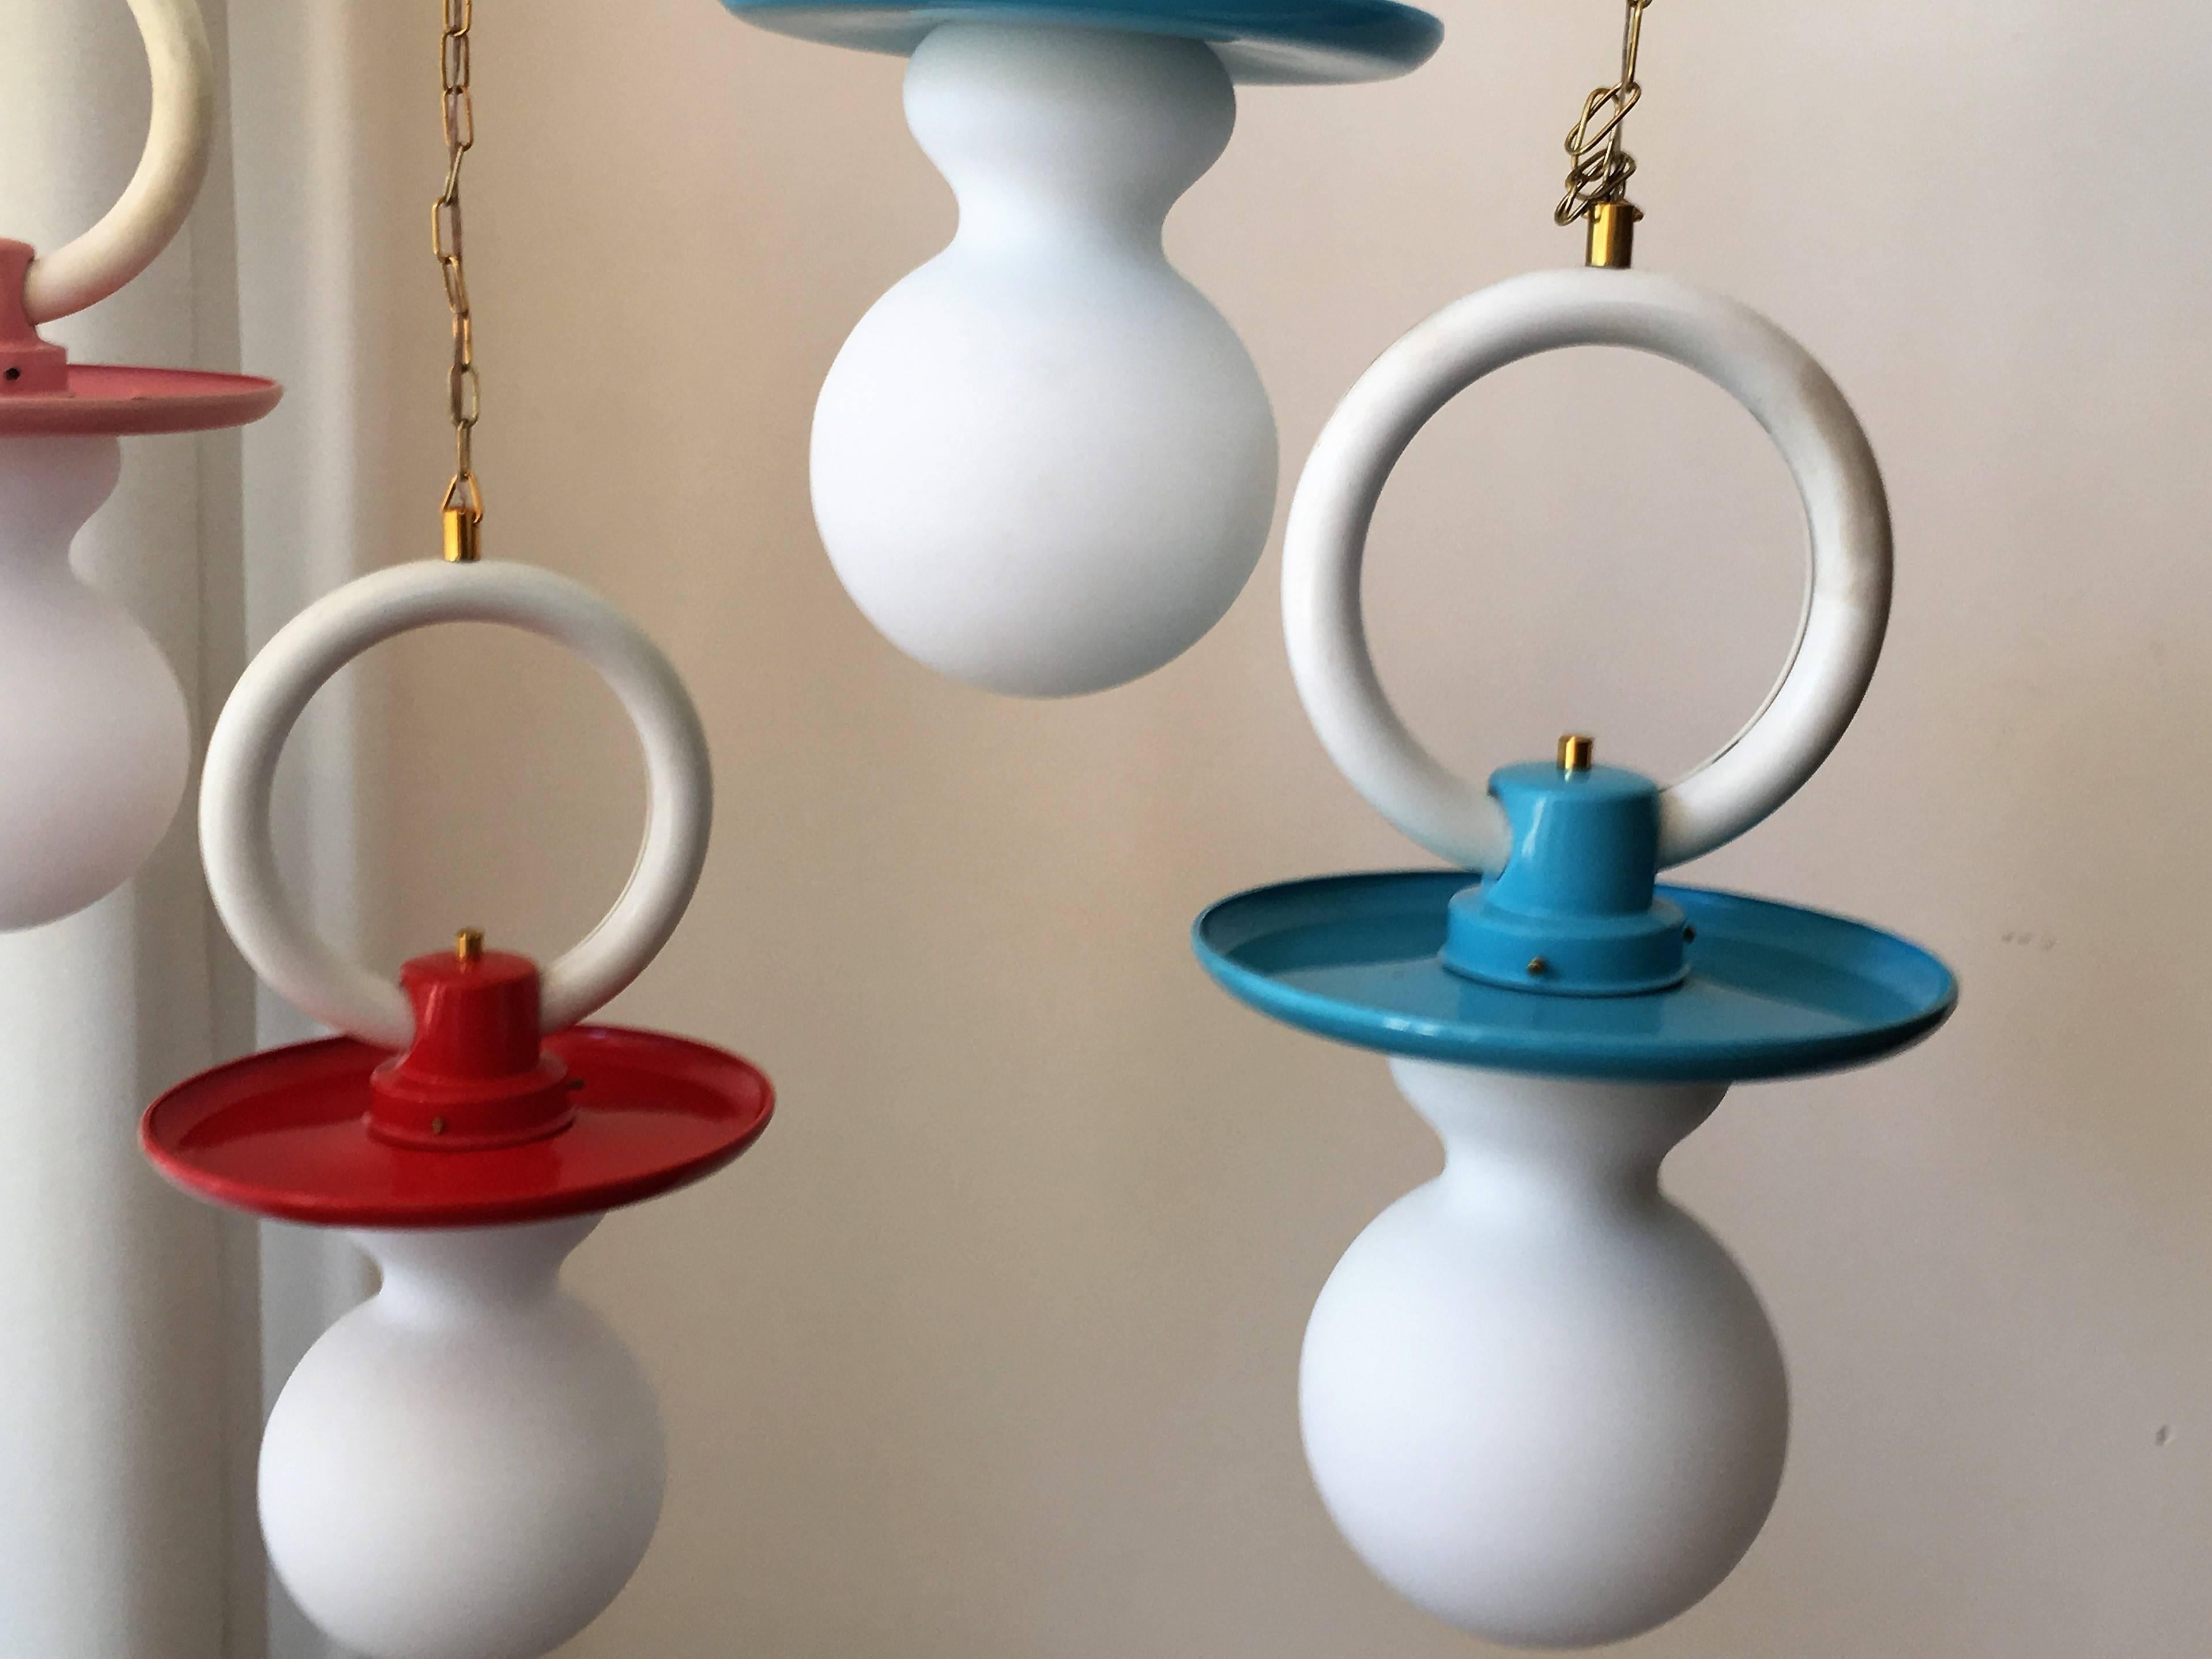 Set of five Art Deco kids lamps.
Two pink,
two blue and
one red.
Metal base and glass lampshade.

Measurements of white glass: Height 10in